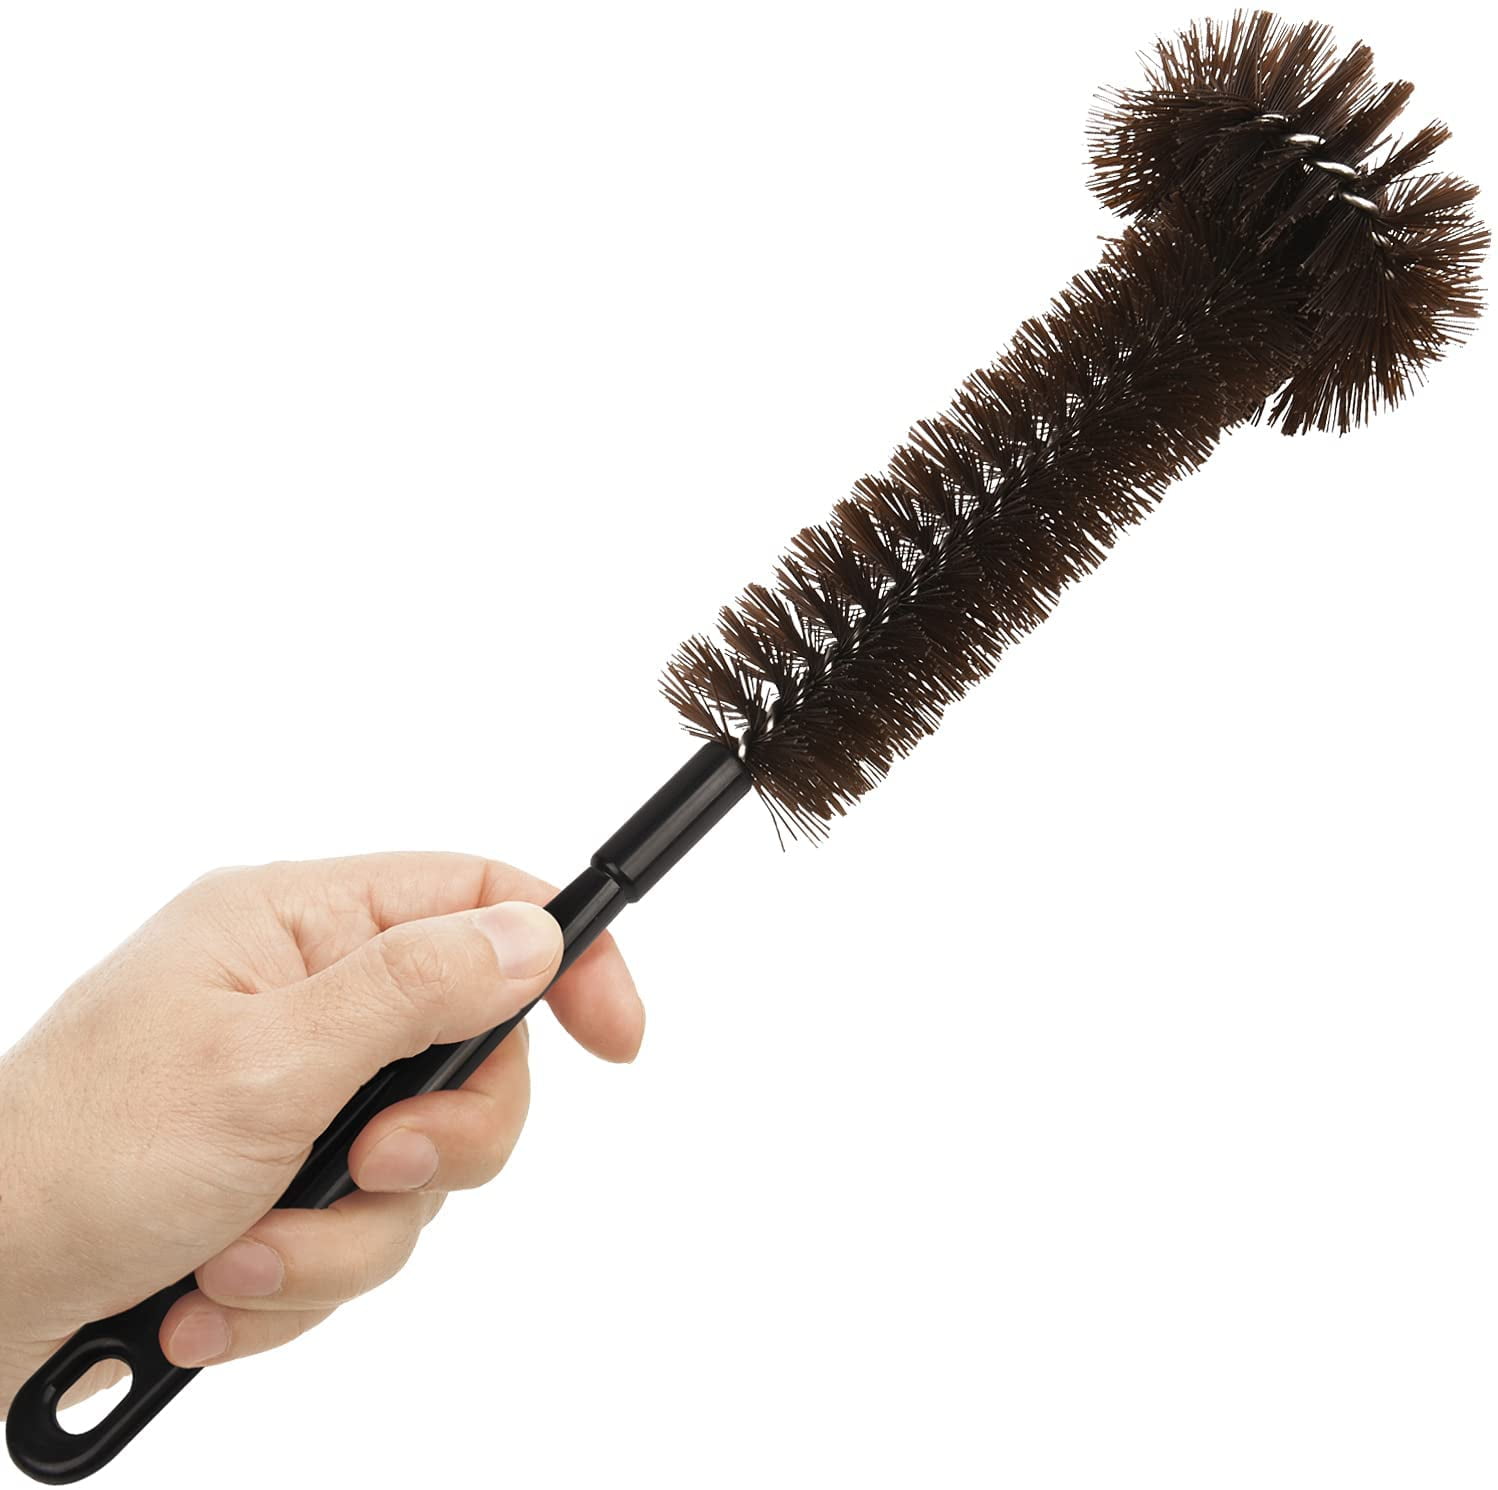 Garbage Disposal Cleaner Brush with Extra Long Handle to Keep Your Drain  Spotless - Disposal Cleaner and Deodorizer for a Fresh Smelling Kitchen 